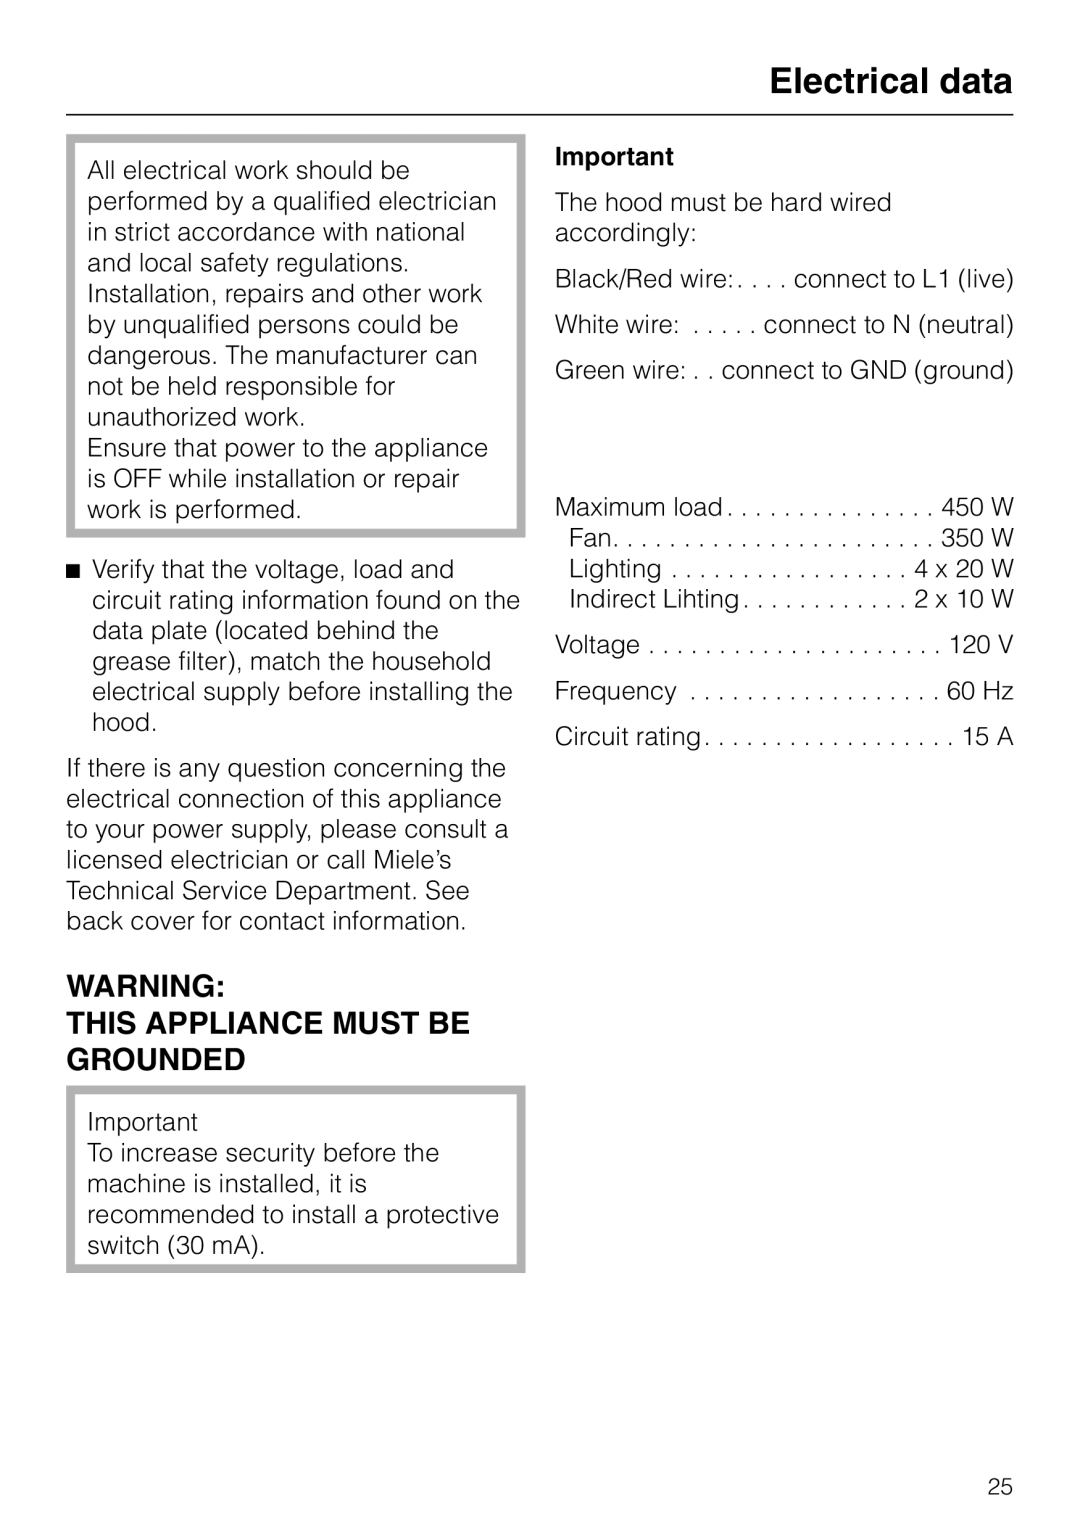 Miele DA 270-4 installation instructions Electrical data, This Appliance Must Be Grounded 